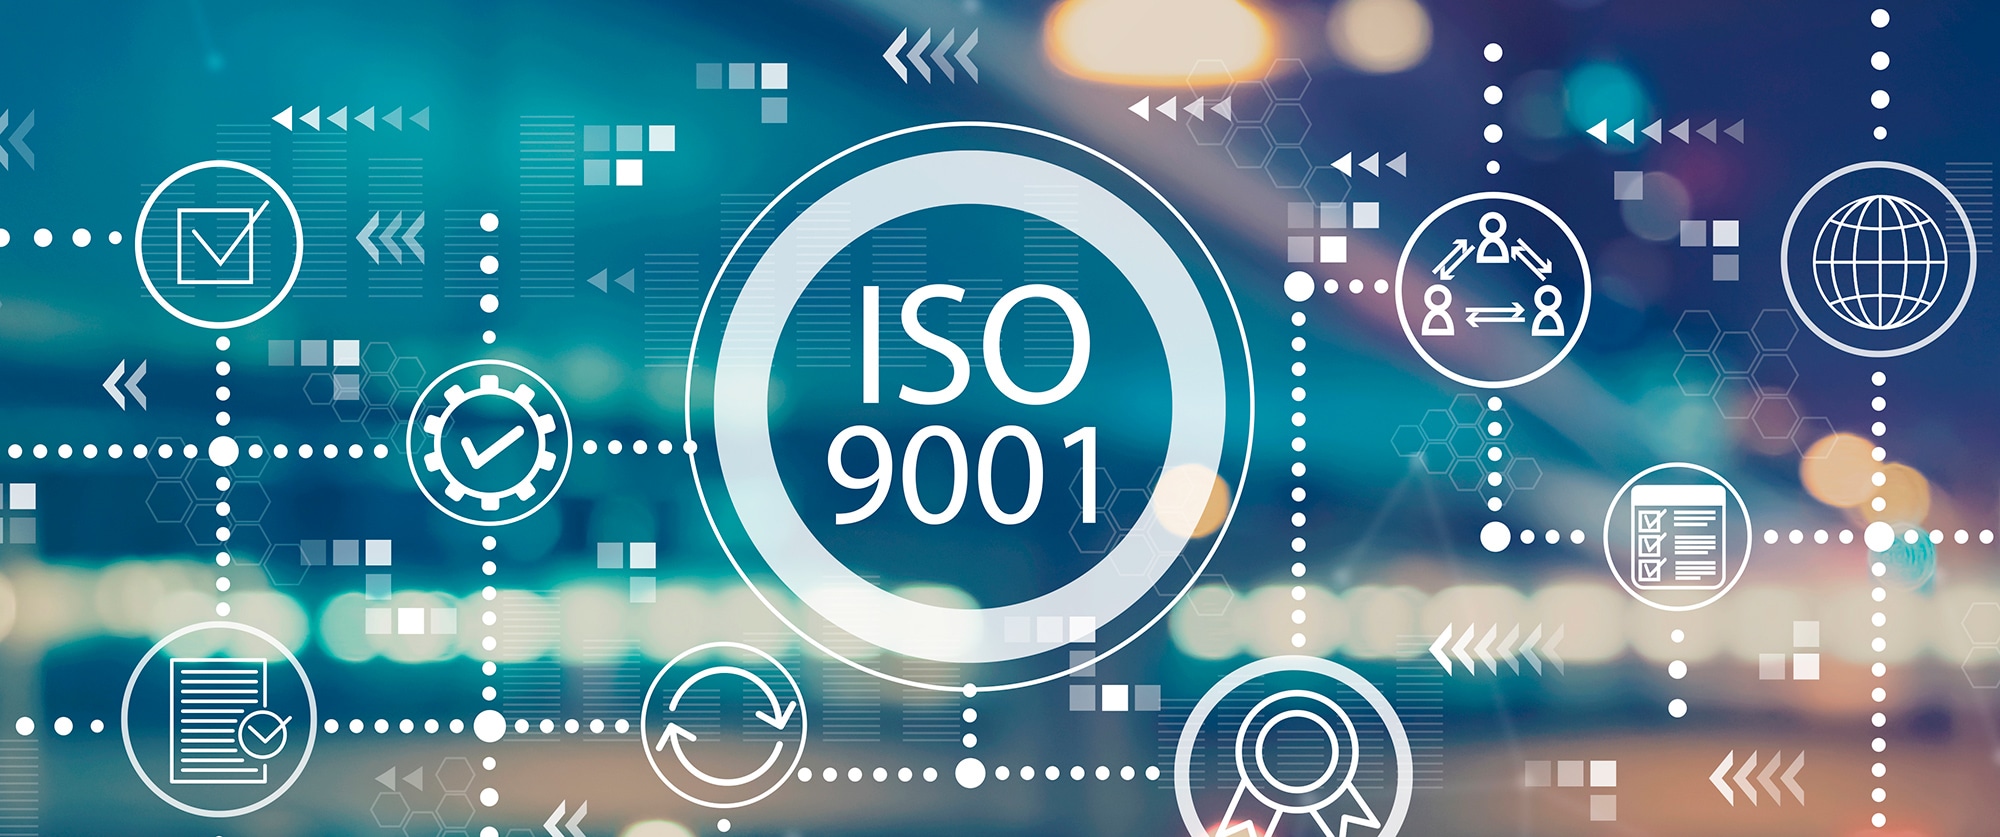 iso-9001-quality-management-system